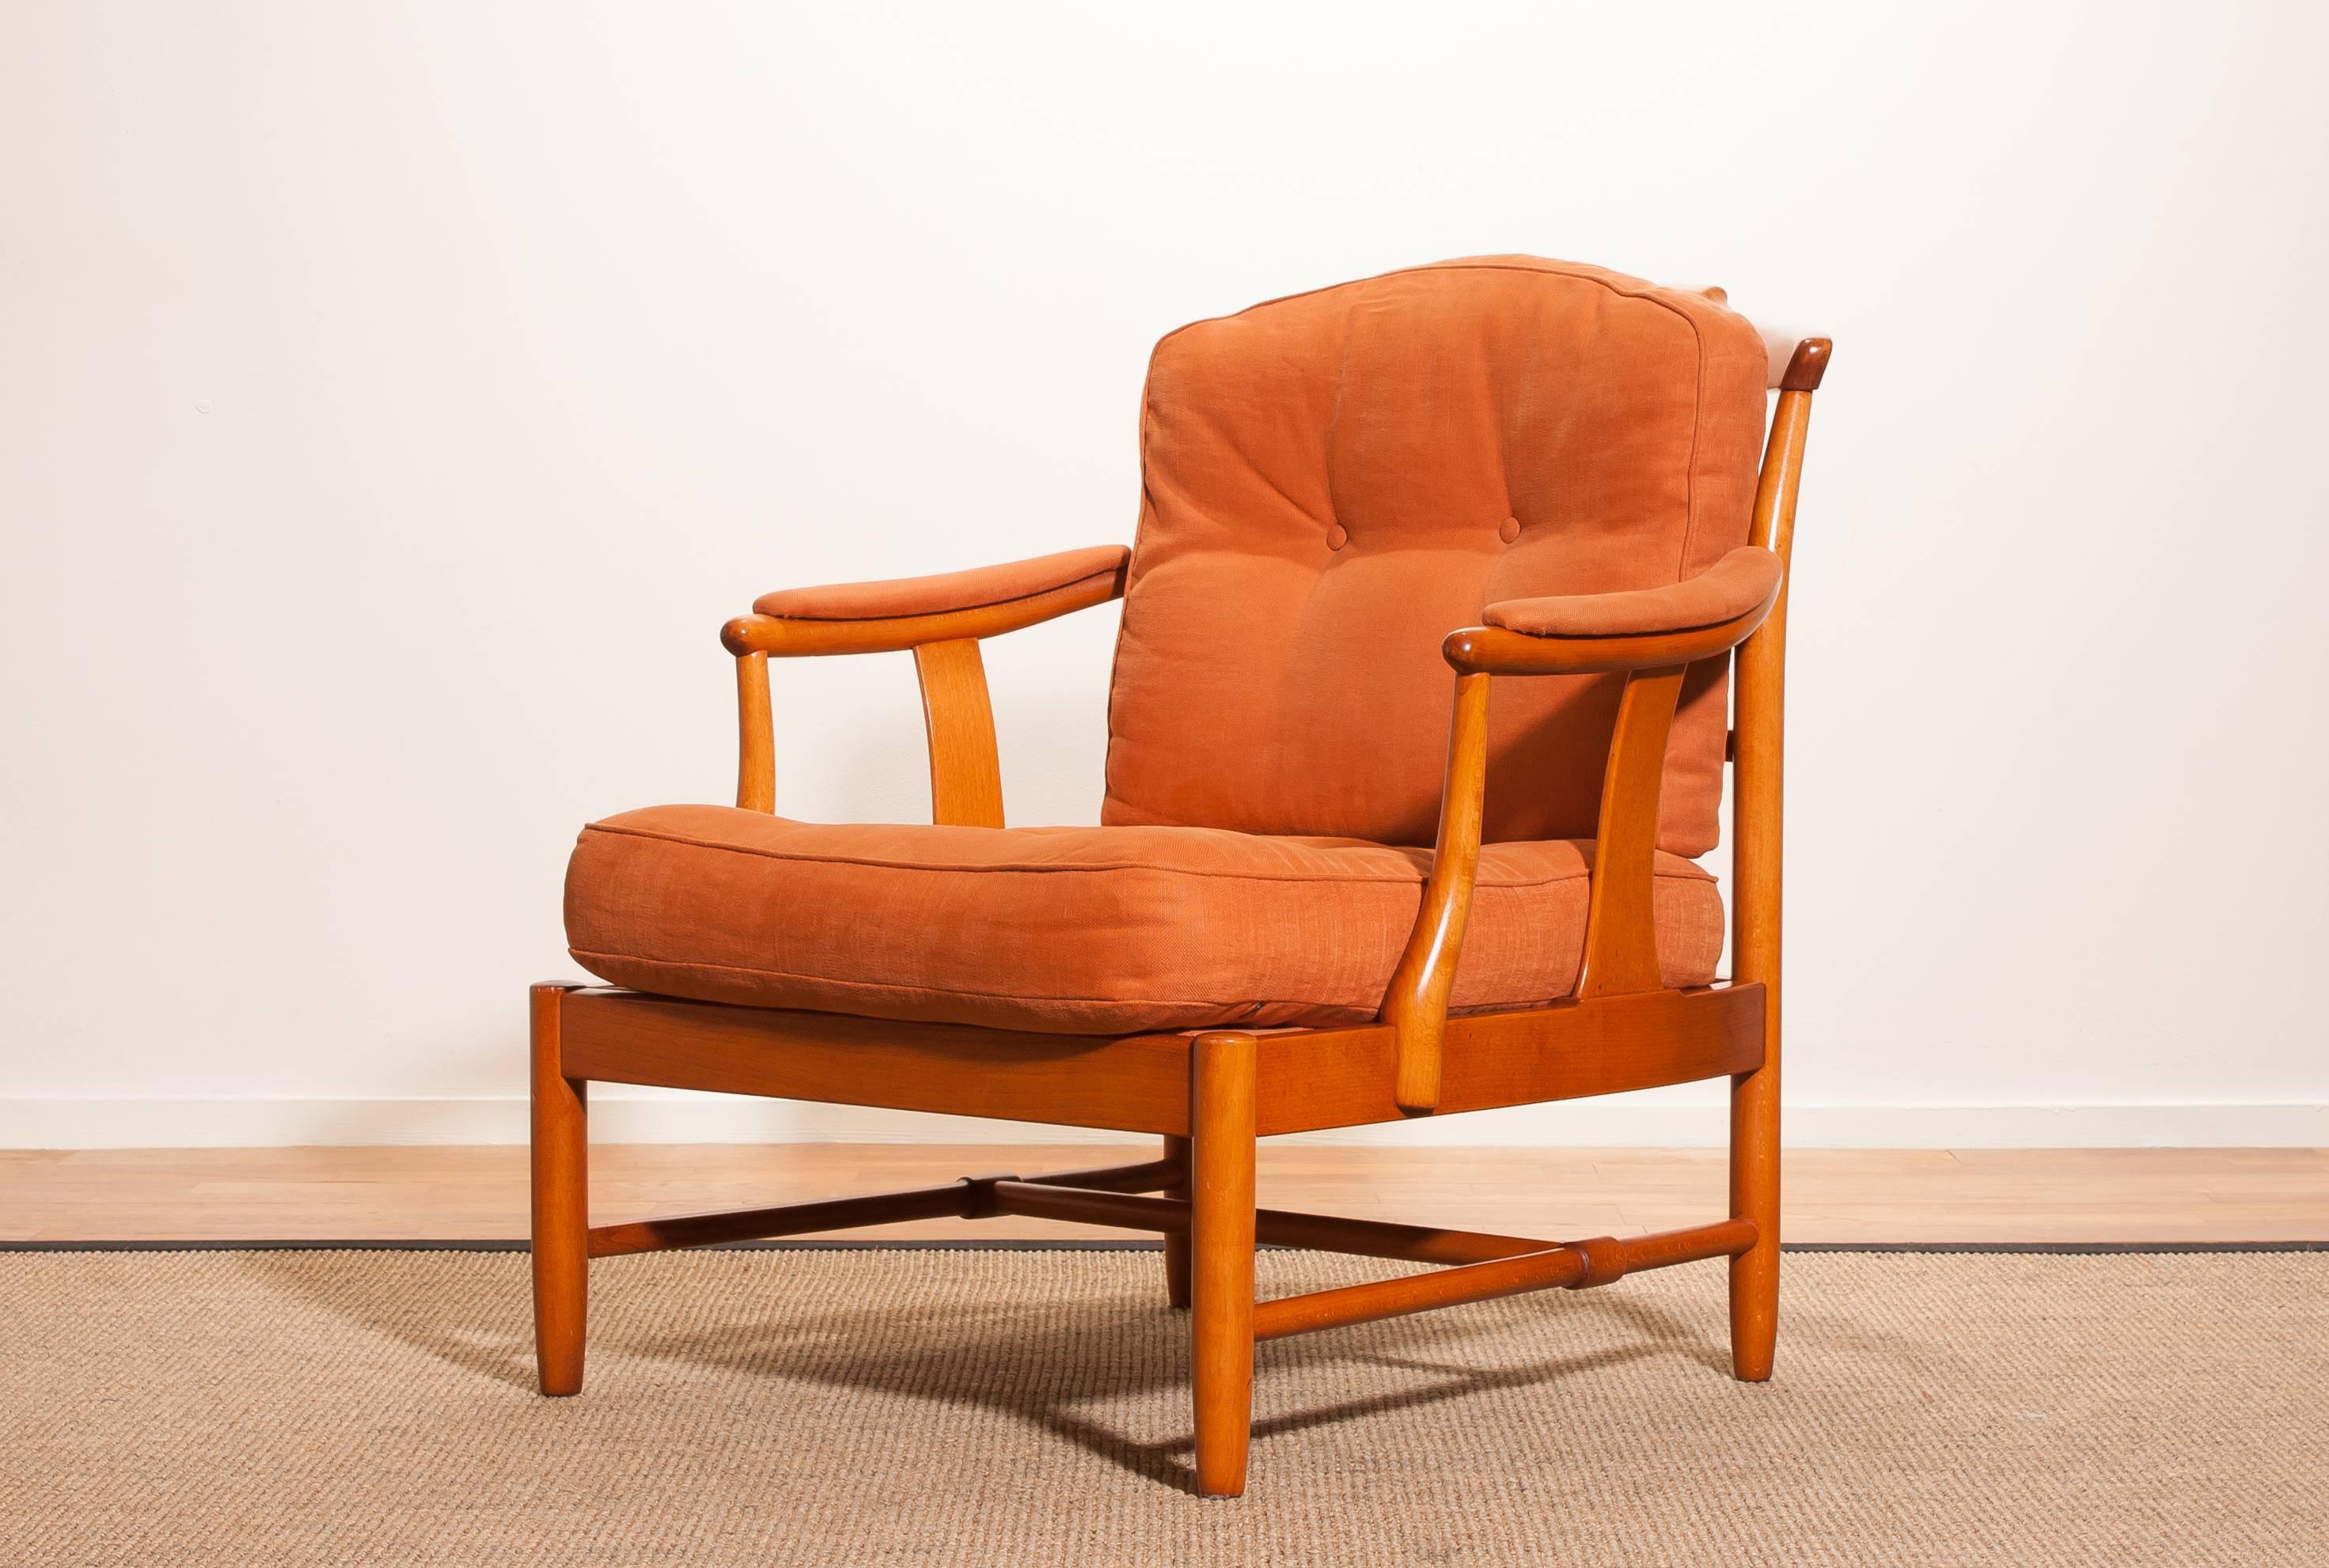 Beautiful Swedish easy chair in the manner of Kerstin Hörlin - Holmquist in terra colored linen fabric in excellent condition.
The beech (mahogany colored) frame is in mint condition.
The chair is recently re-upholstered in the 1980s. Also, the